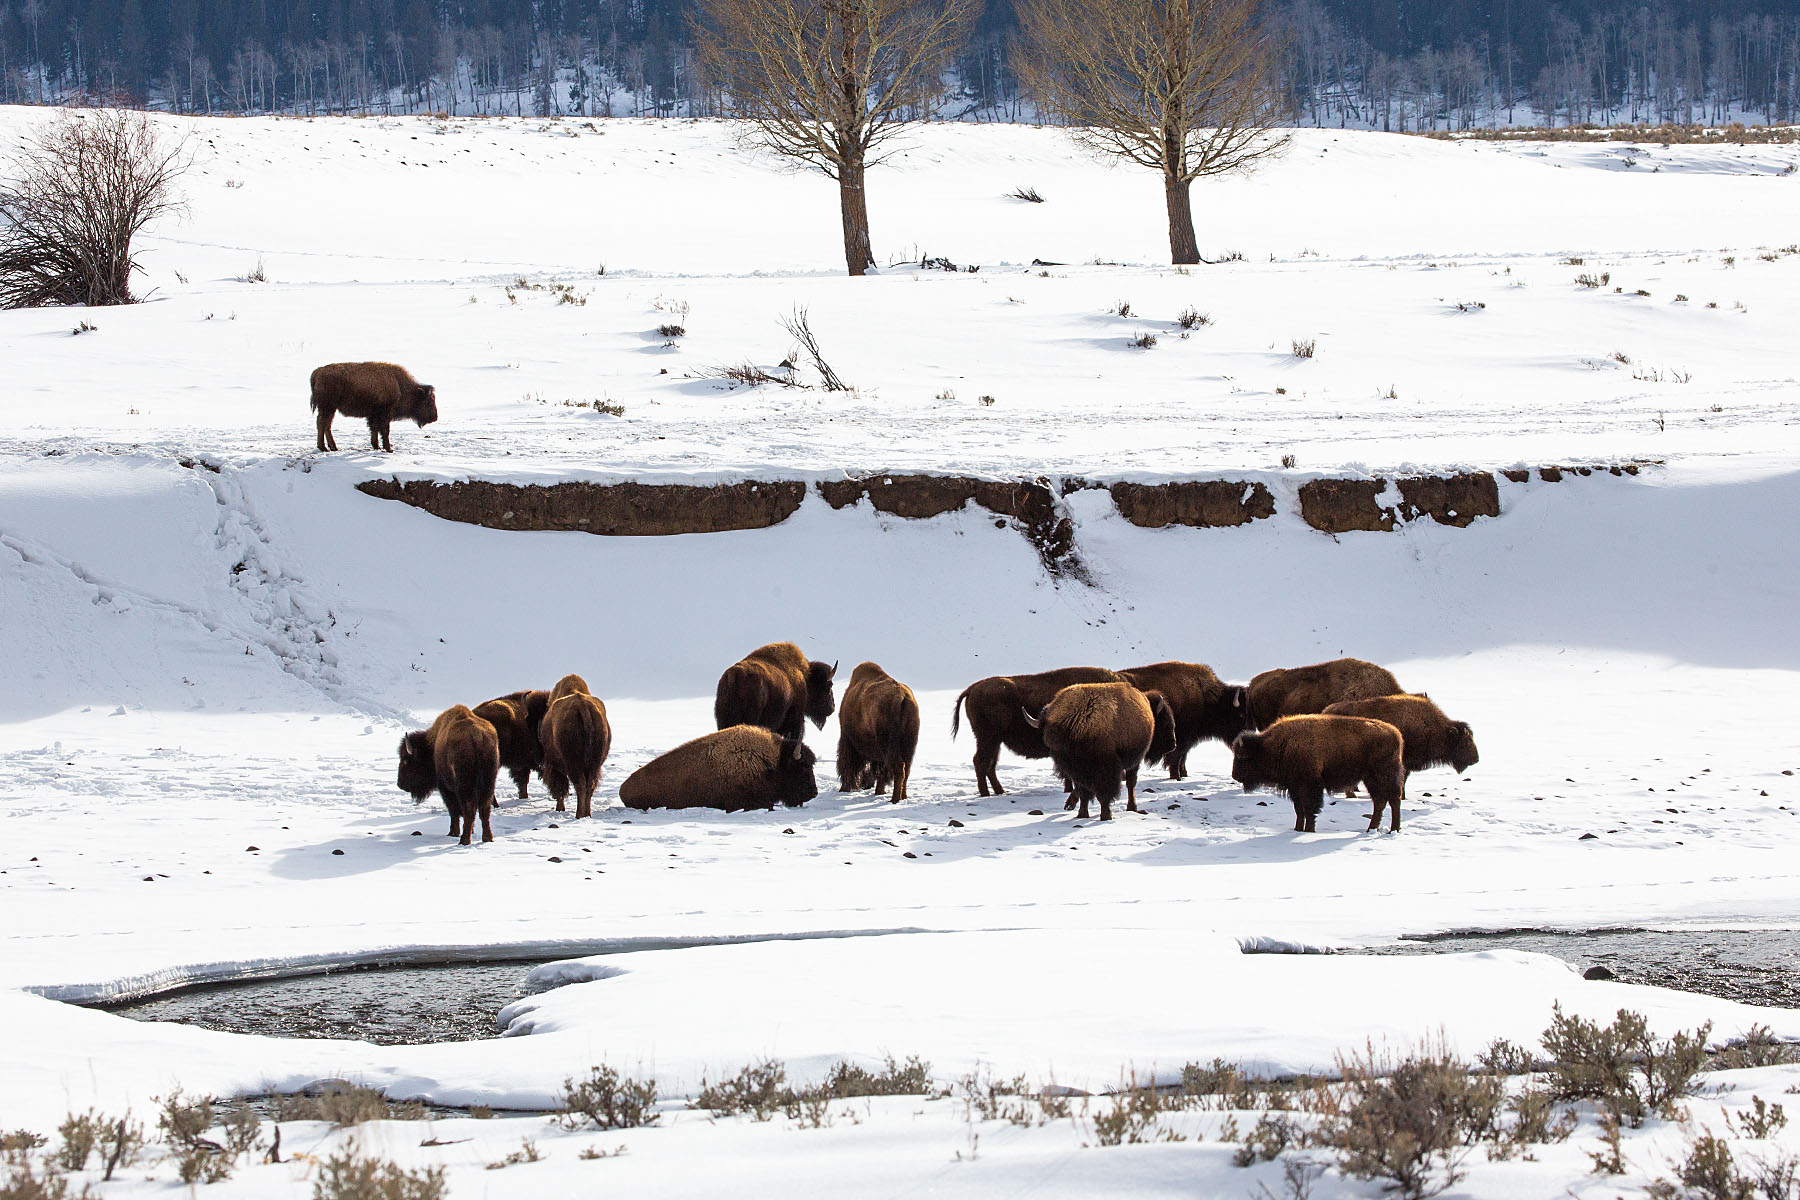 Small herd of bison in the Lamar Valley, Yellowstone, February 2022.  Click for next photo.